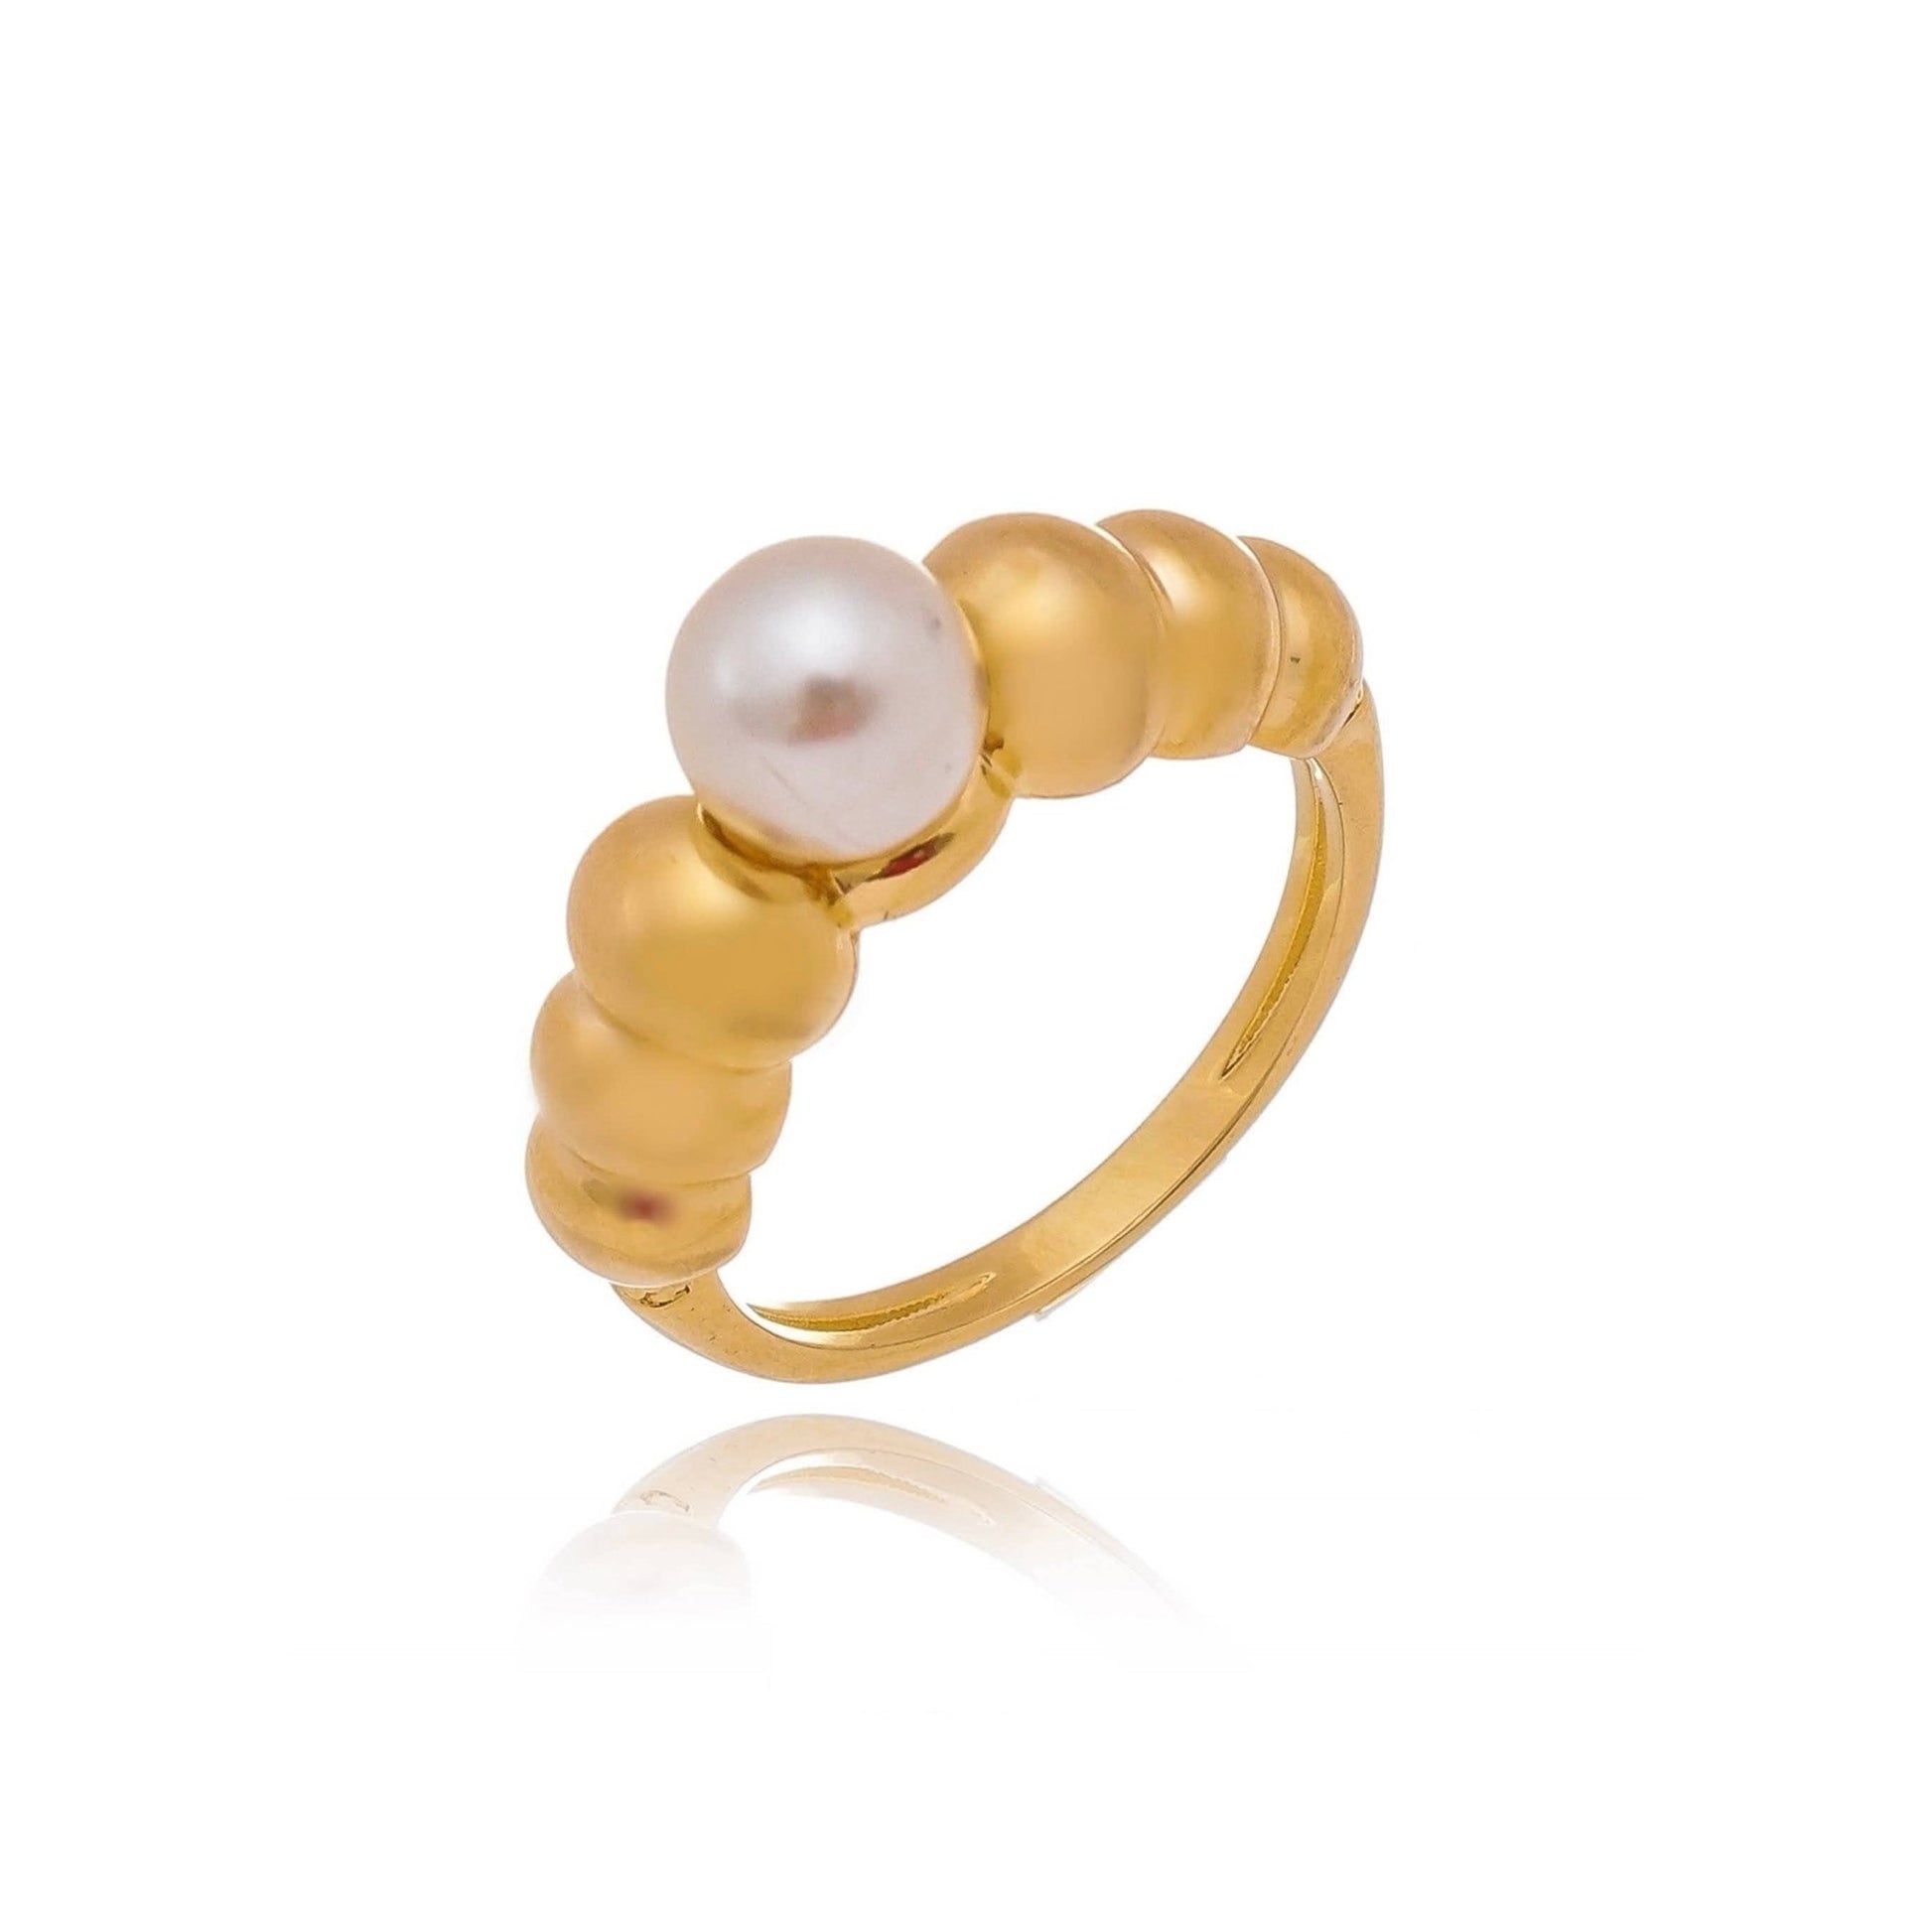 18k Gold Filled Beads and Pearl Ring - FOREVERLINKX